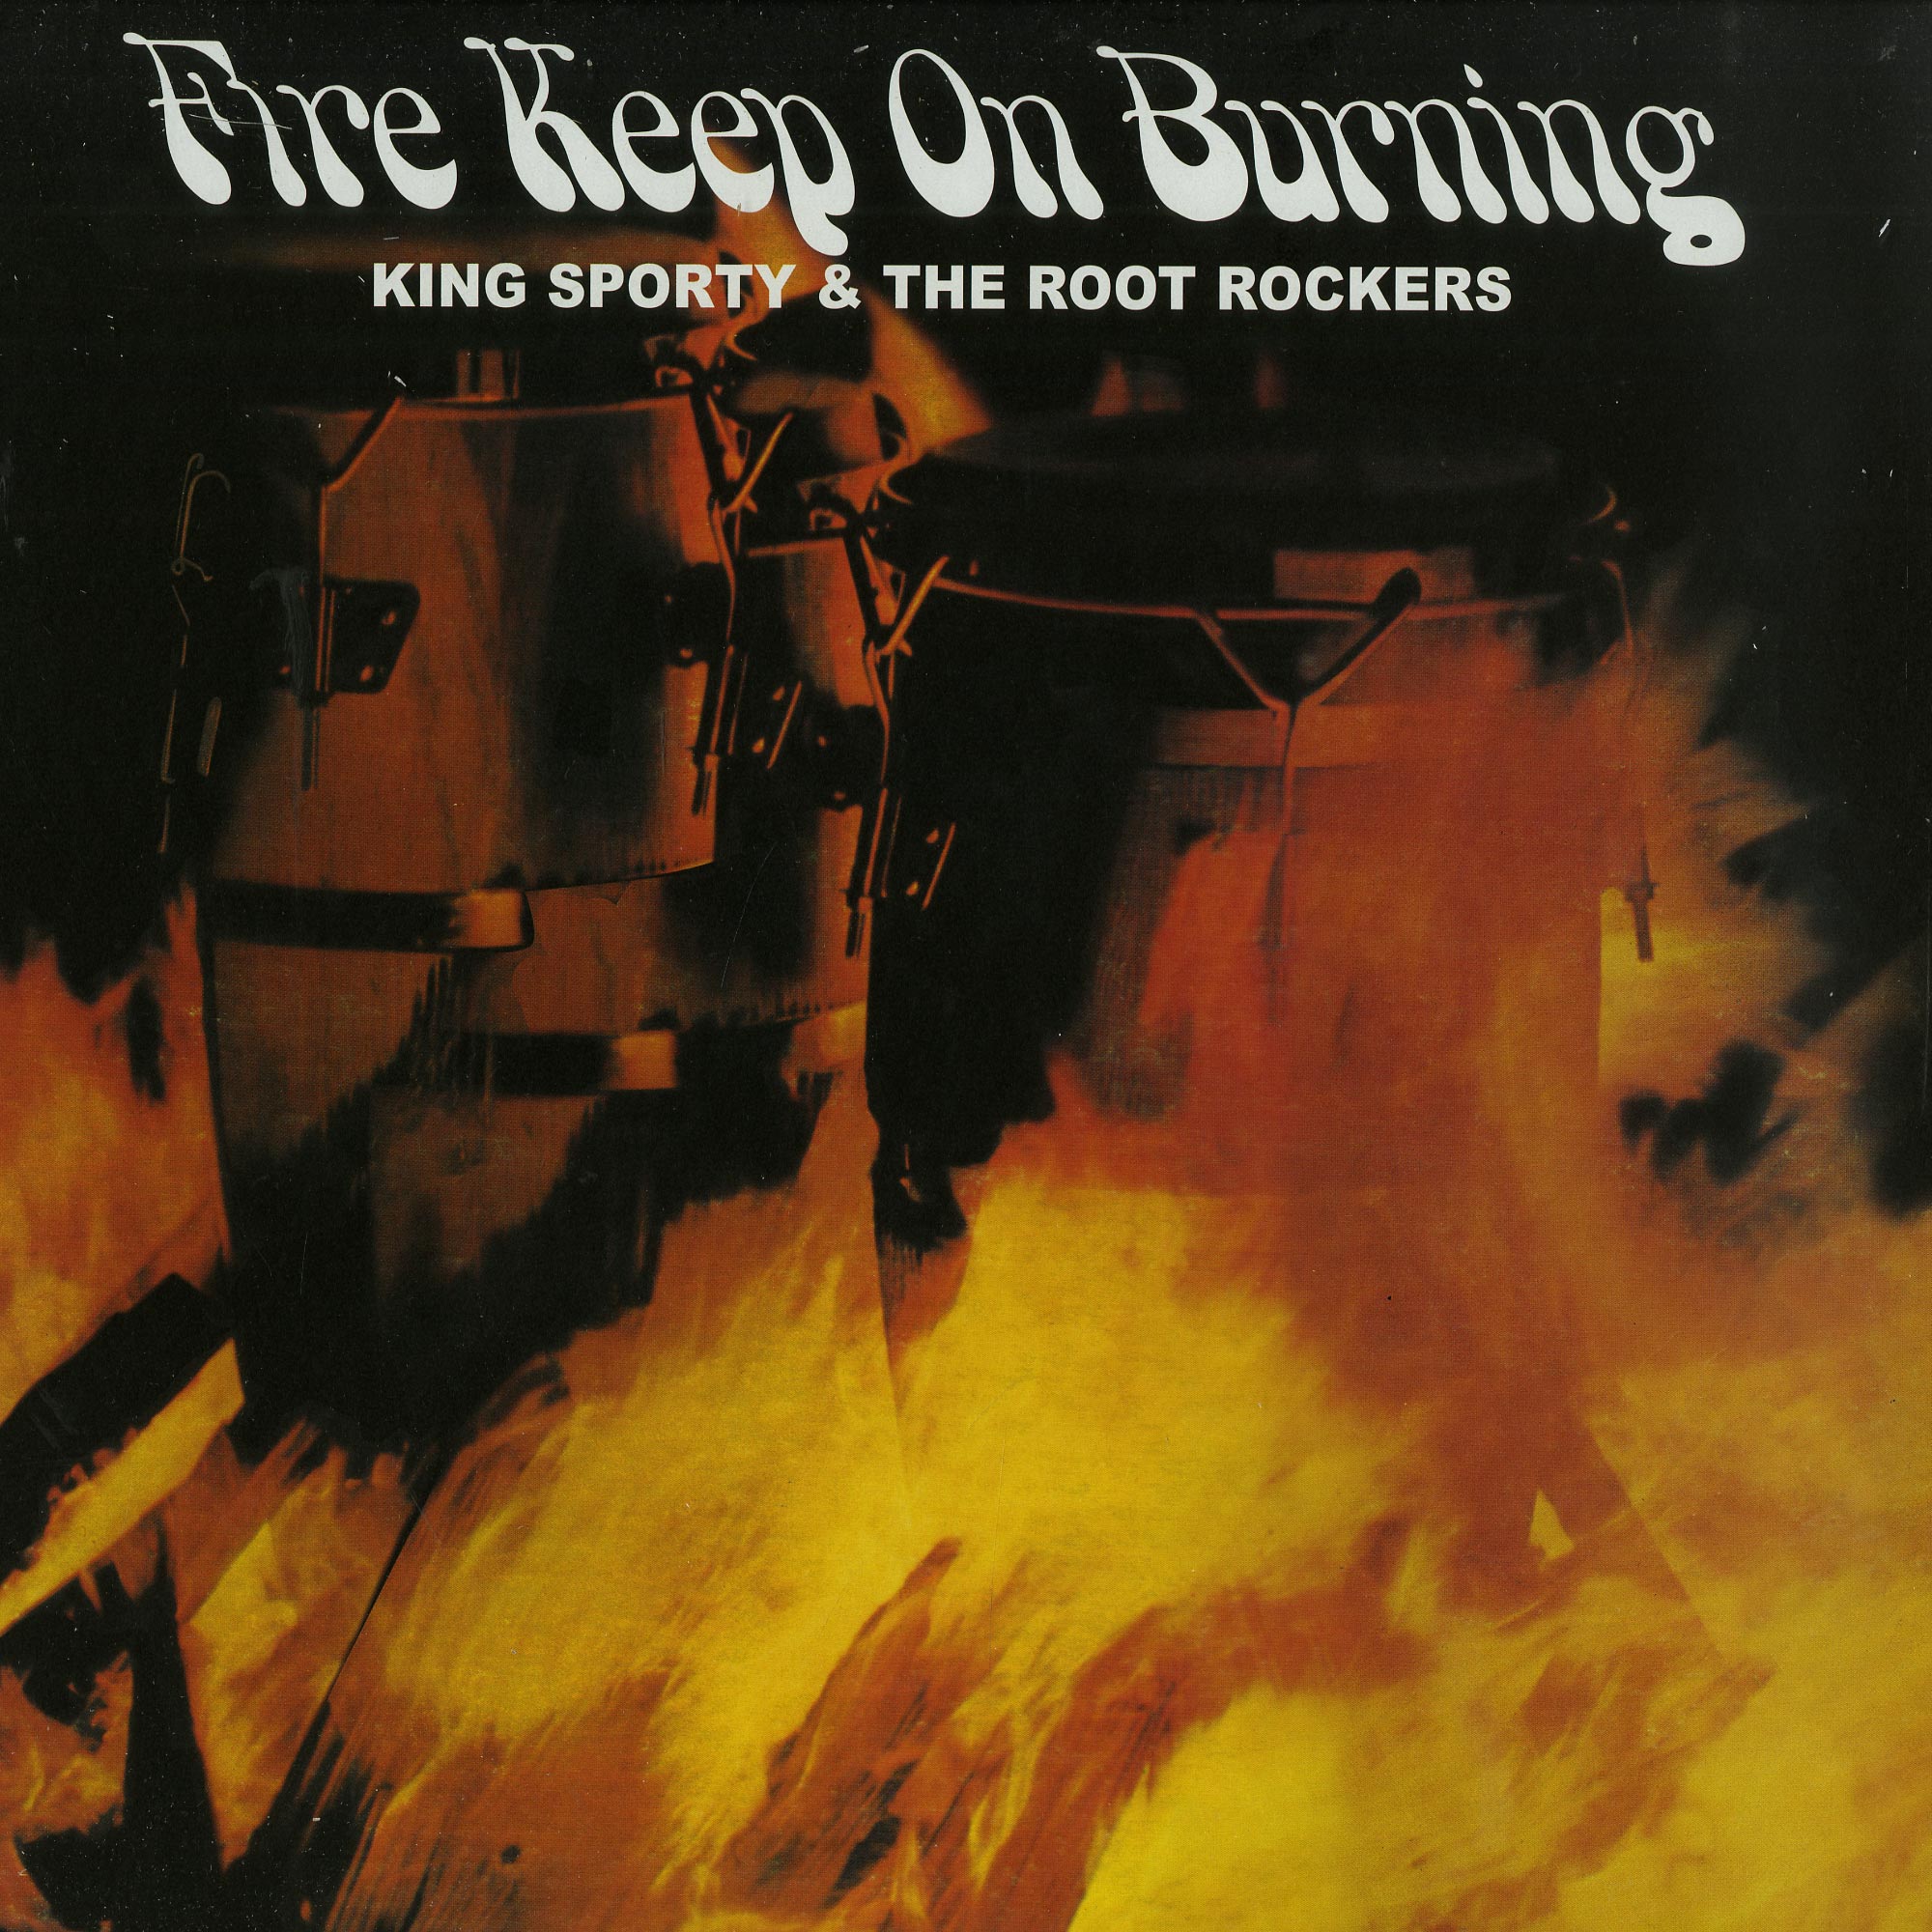 King　ON　KEEP　Sporty　Rockers　FIRE　The　Root　BURNING